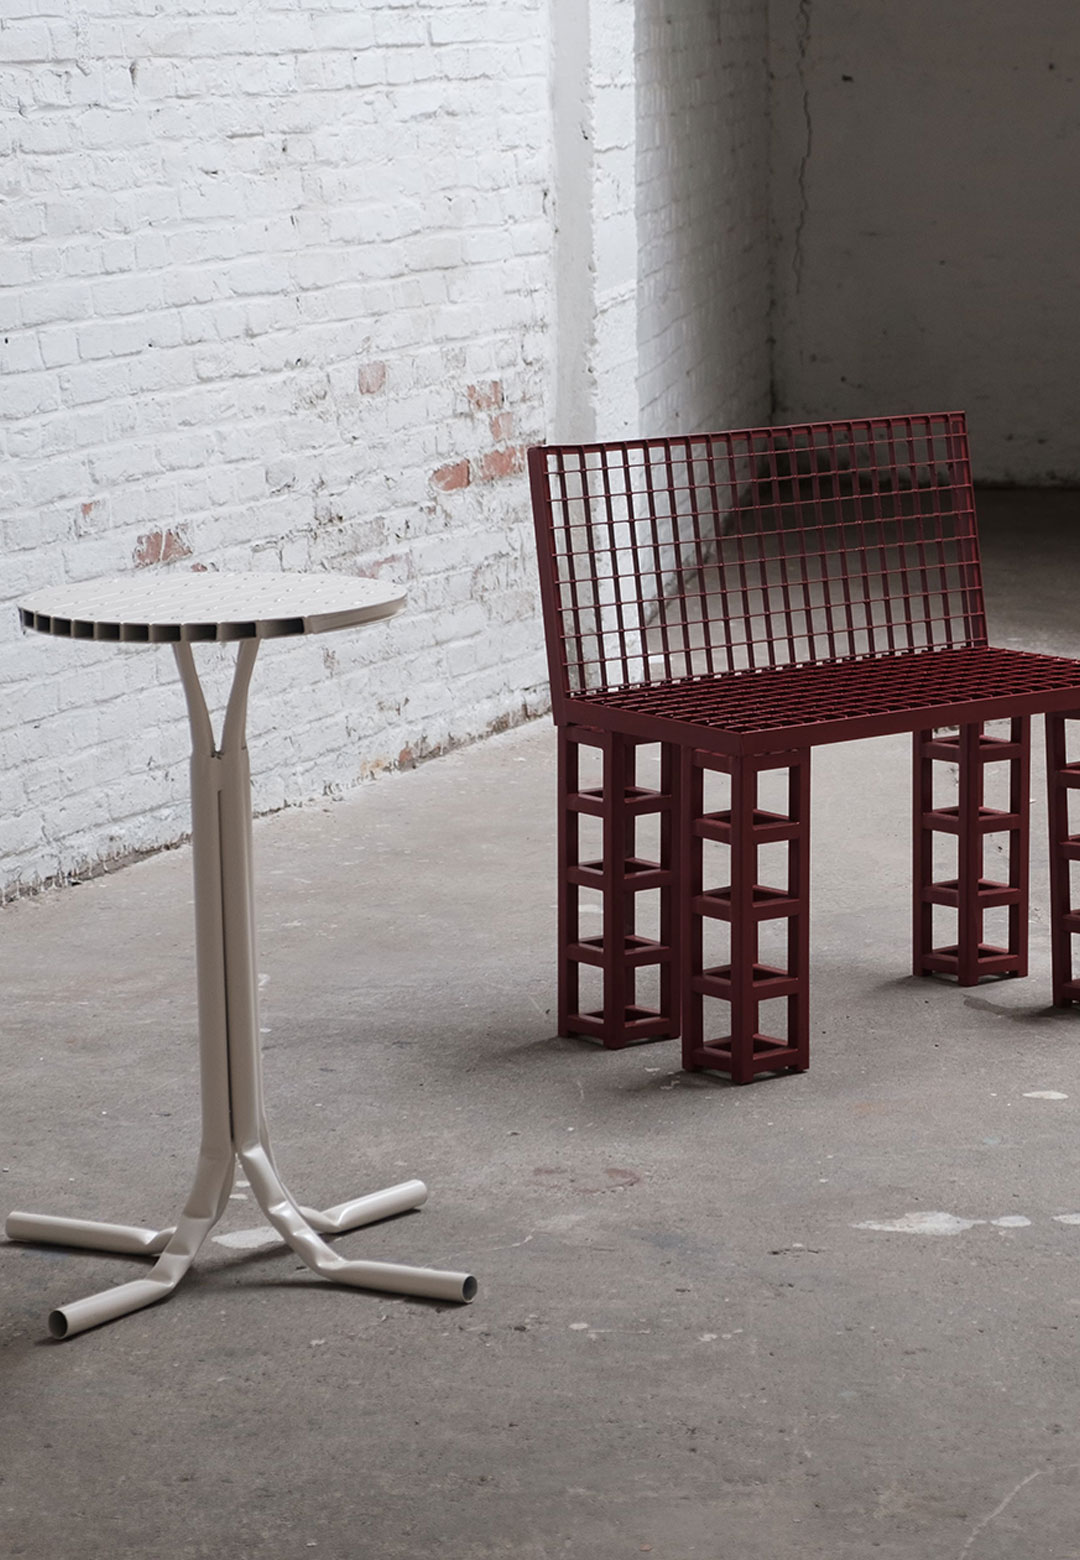 Lauren Goodman salvages Eindhoven’s local trash to build usable furniture